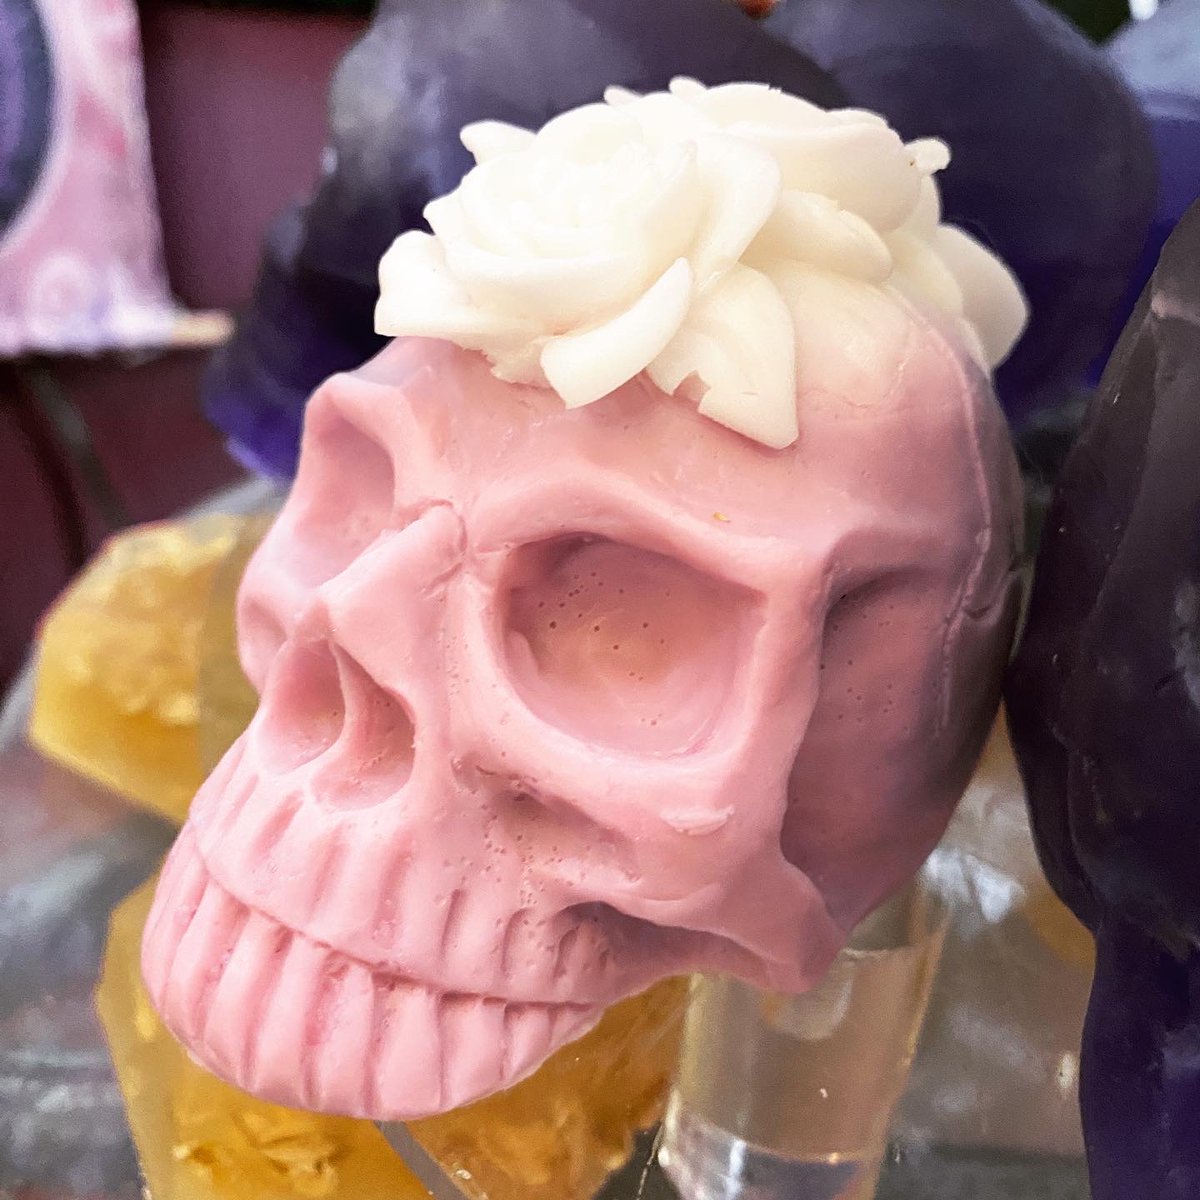 “Do not worry about your contradictions – Persephone is both floral maiden and queen of death. You, too, can be both.”

#Skull #Flowers #Skull #FloralSkull #Persephone #Demeter #Transformation #WhyNotBoth #ArtisanSoap #HandmadeSoap